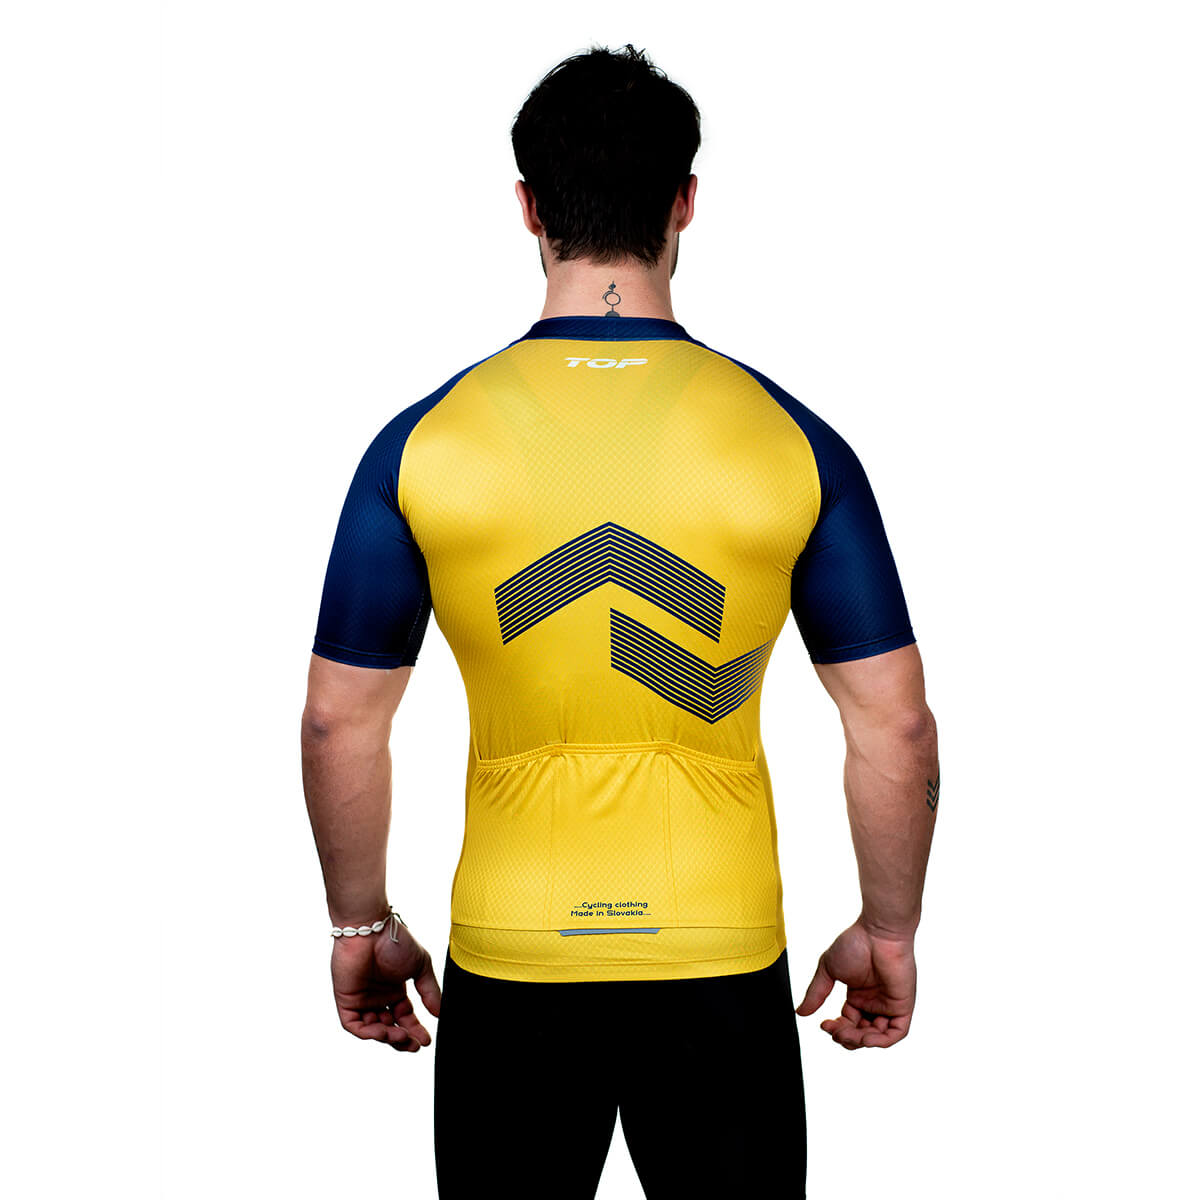 The jersey has a ventilated underarm made of material.